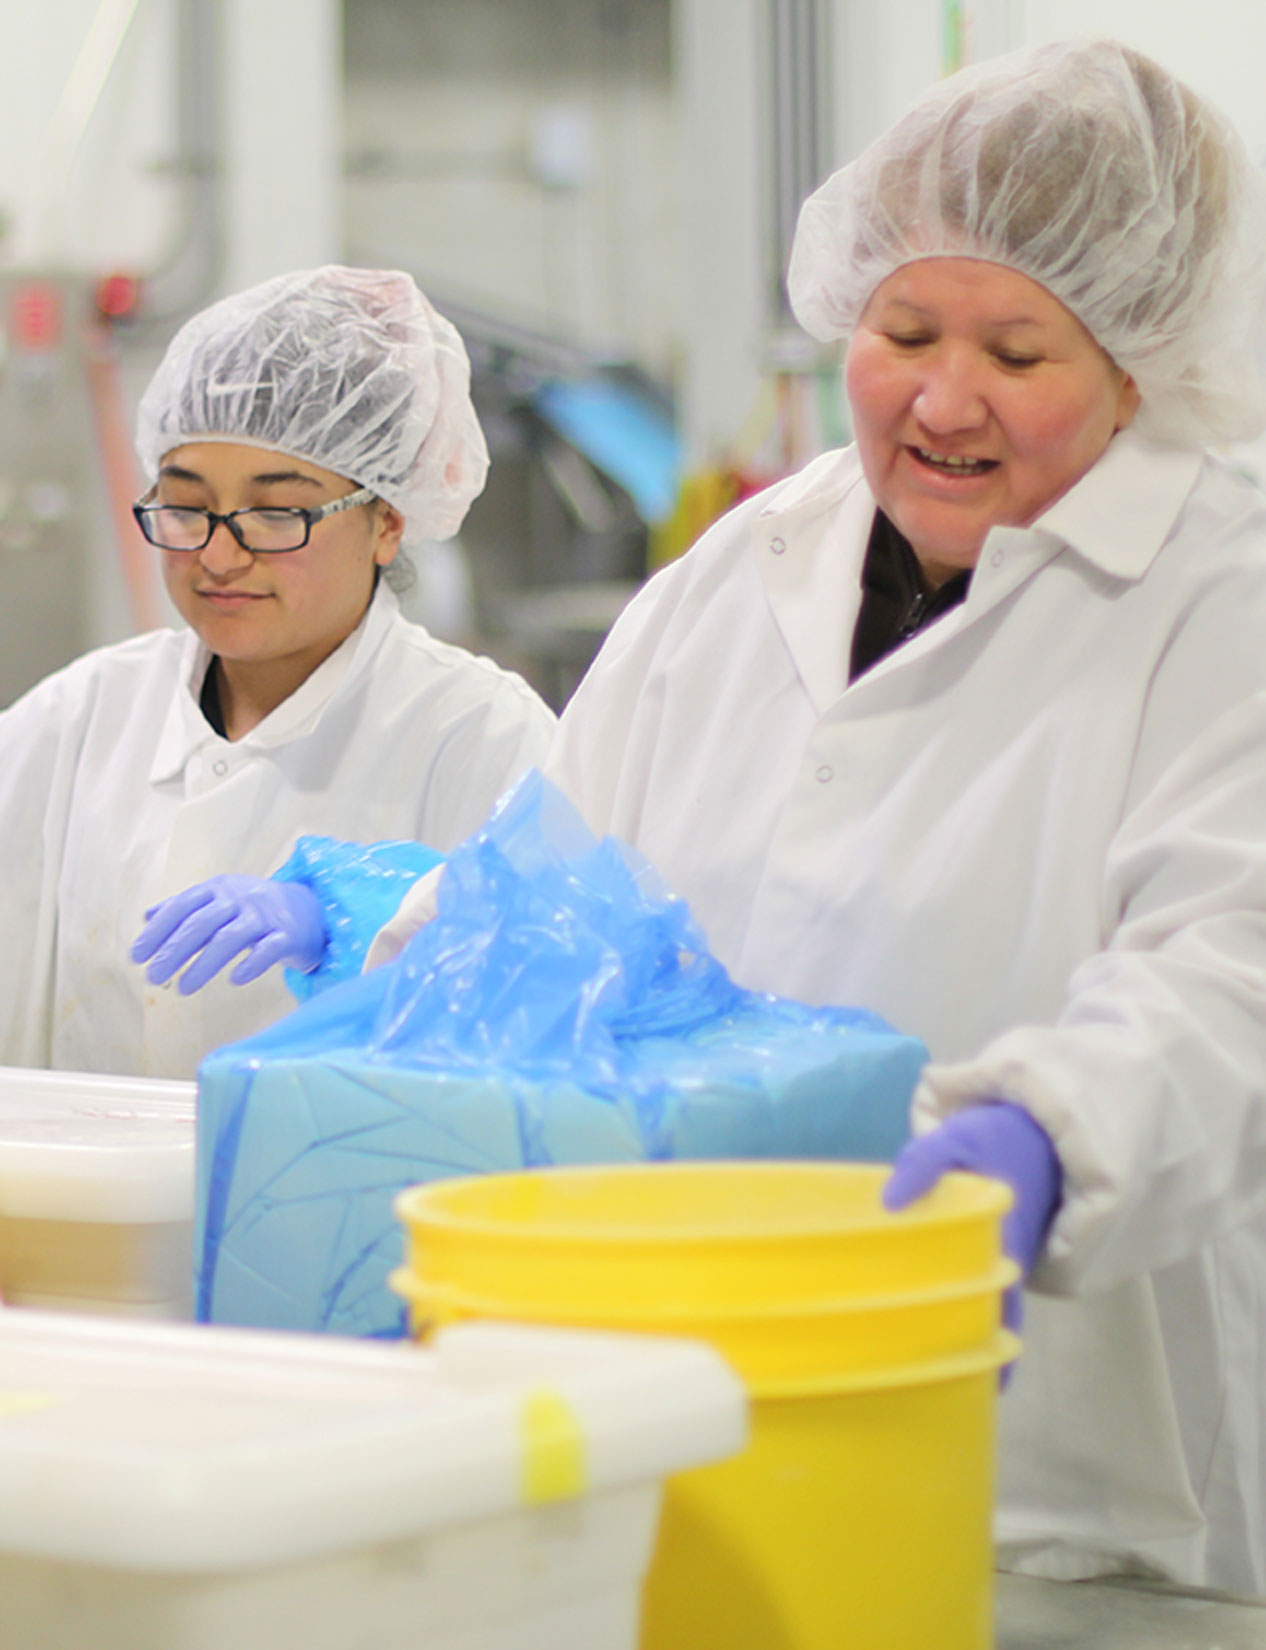 Two production employees mixing together various ingredients